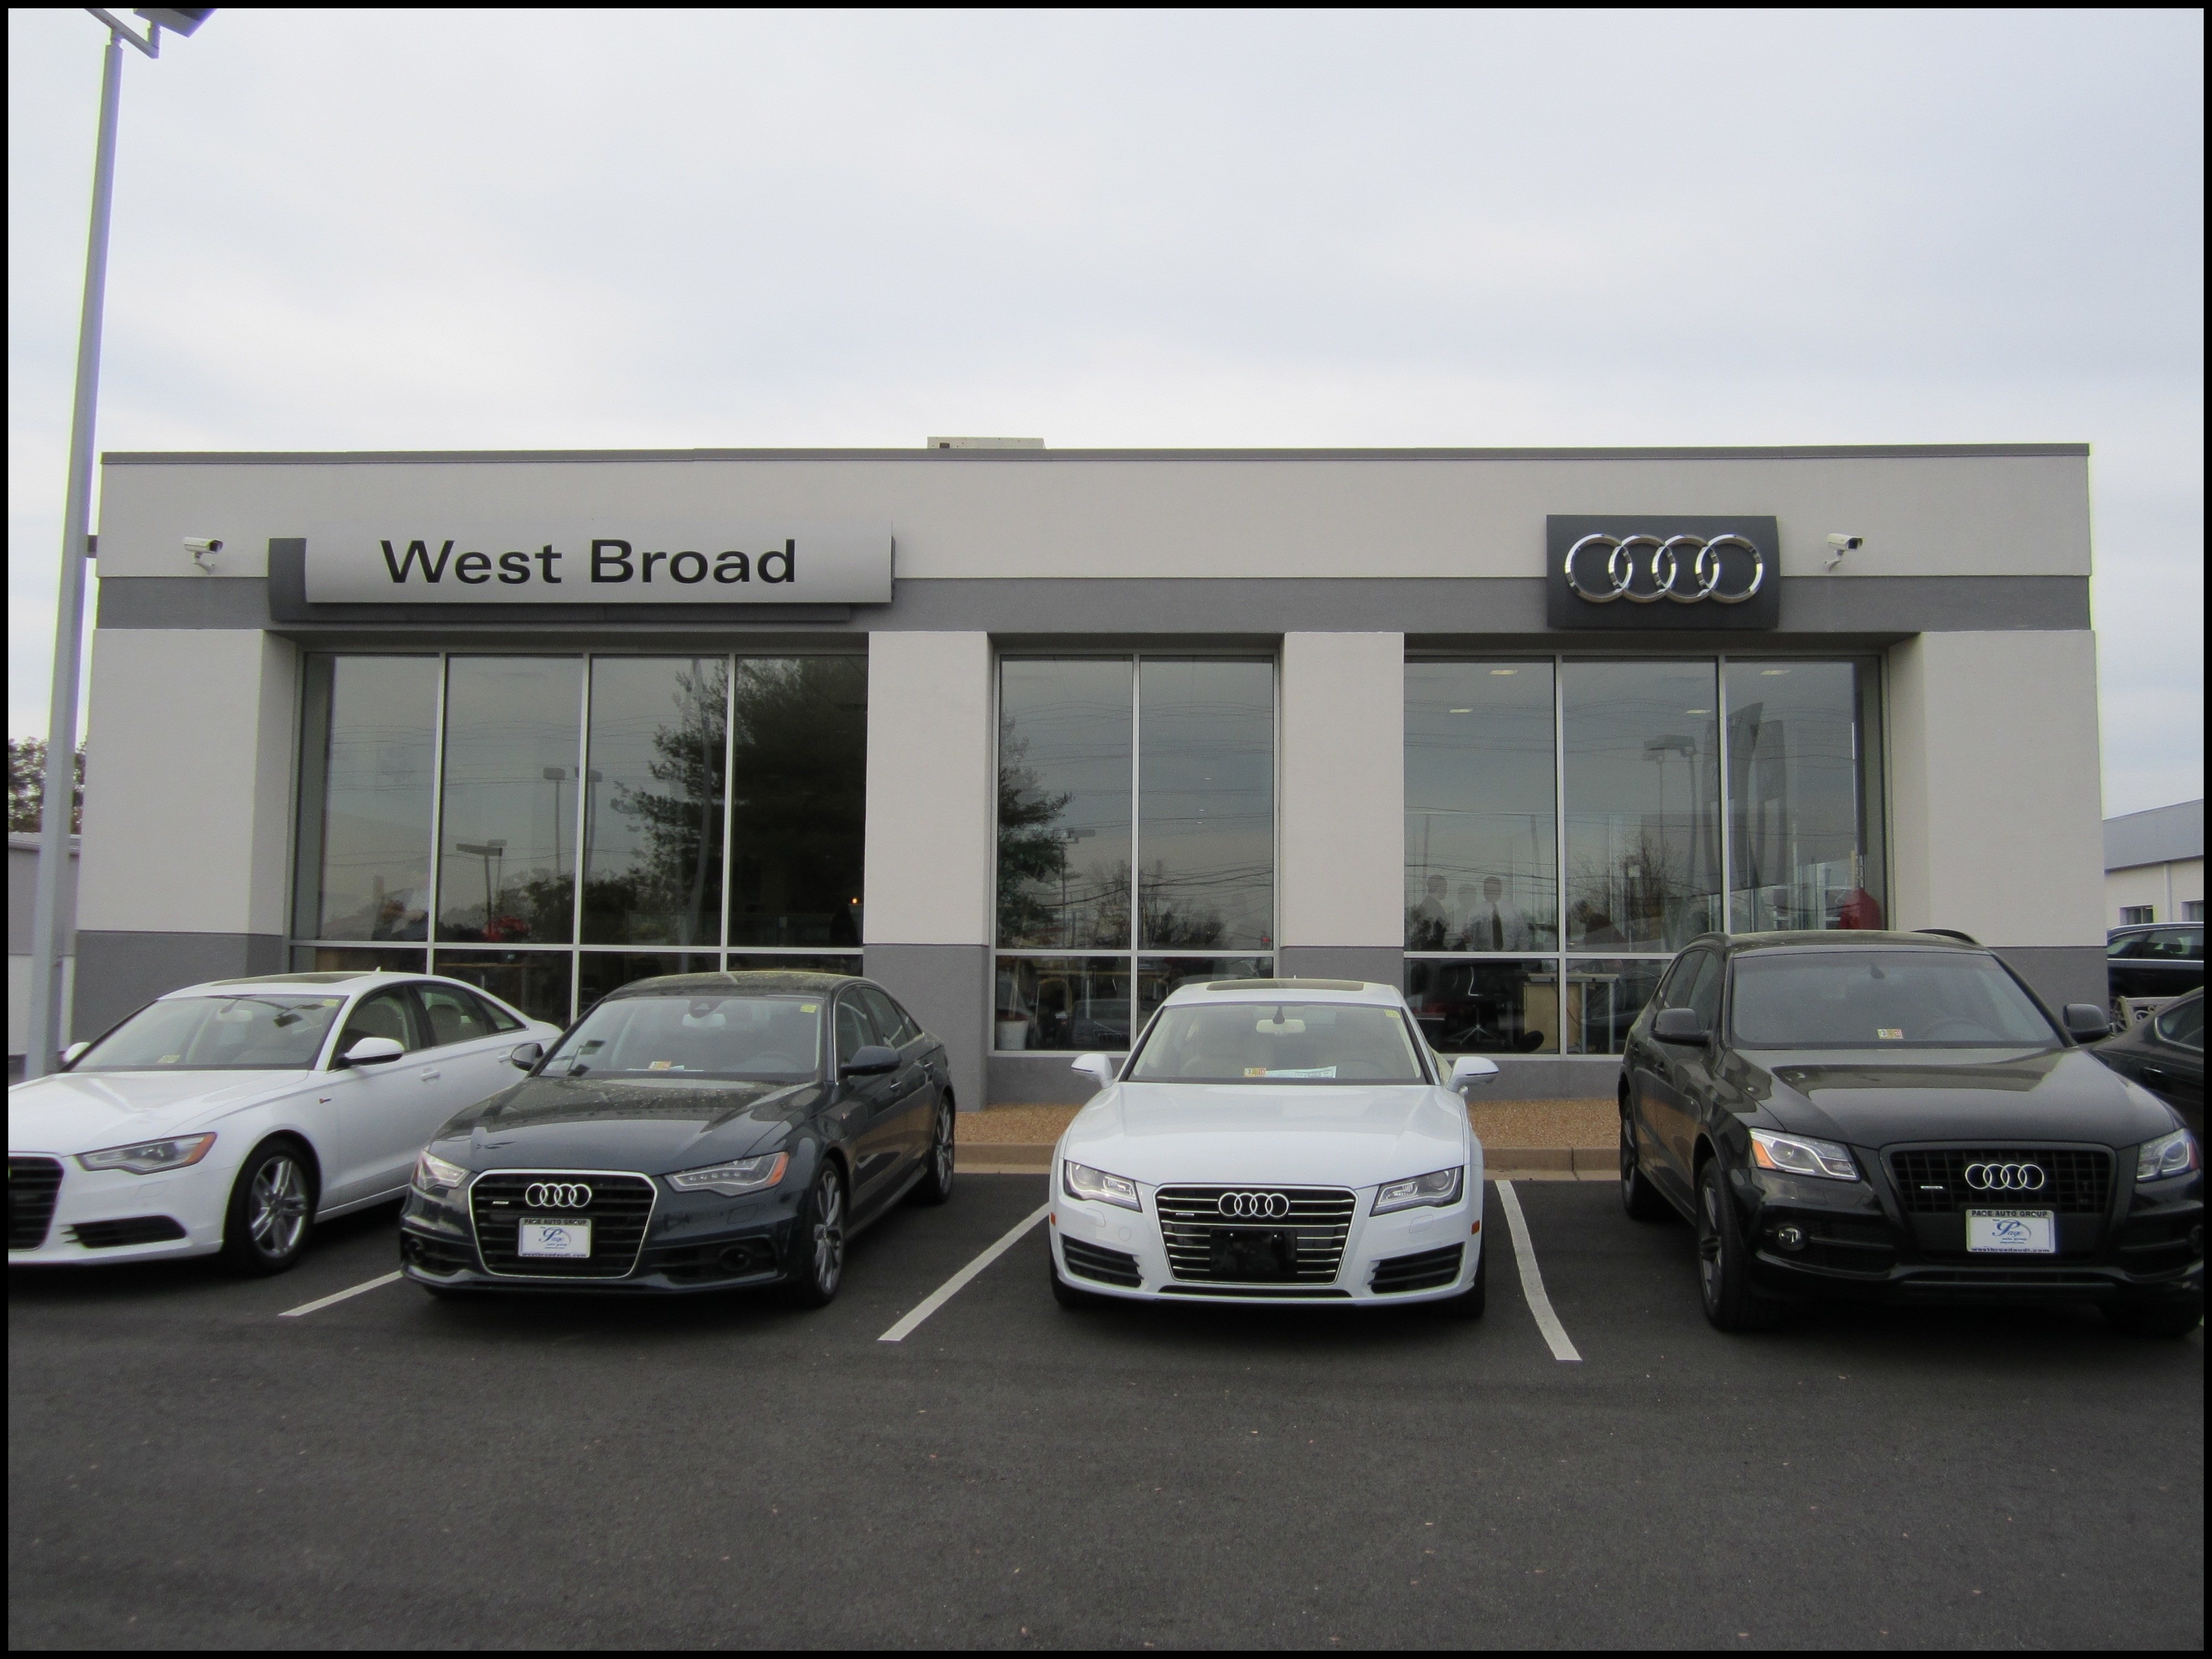 West Broad Audi About Us page